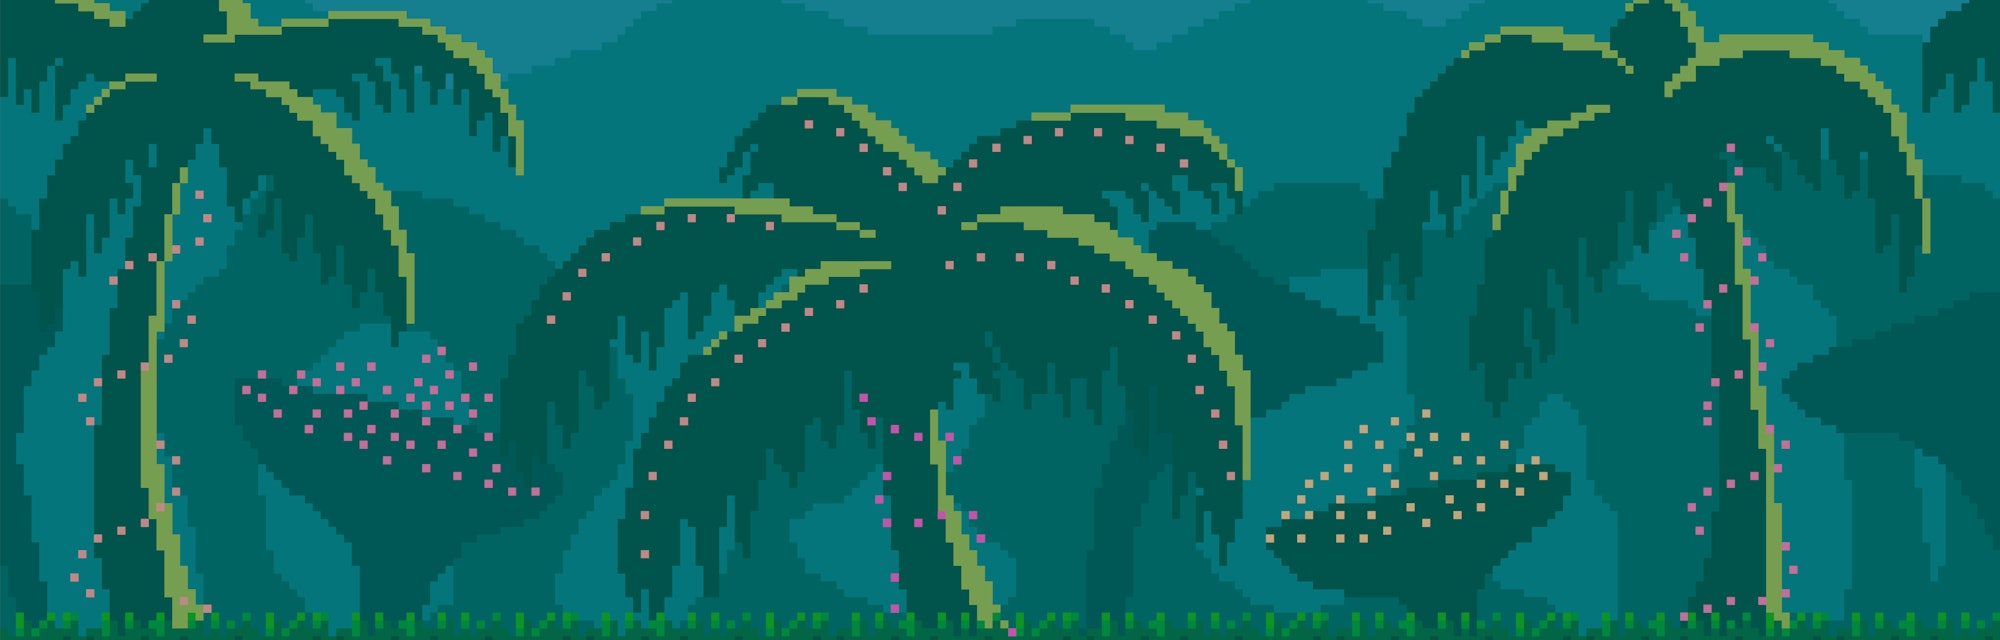 Pixel art seamless landscape with tropics area for game design.